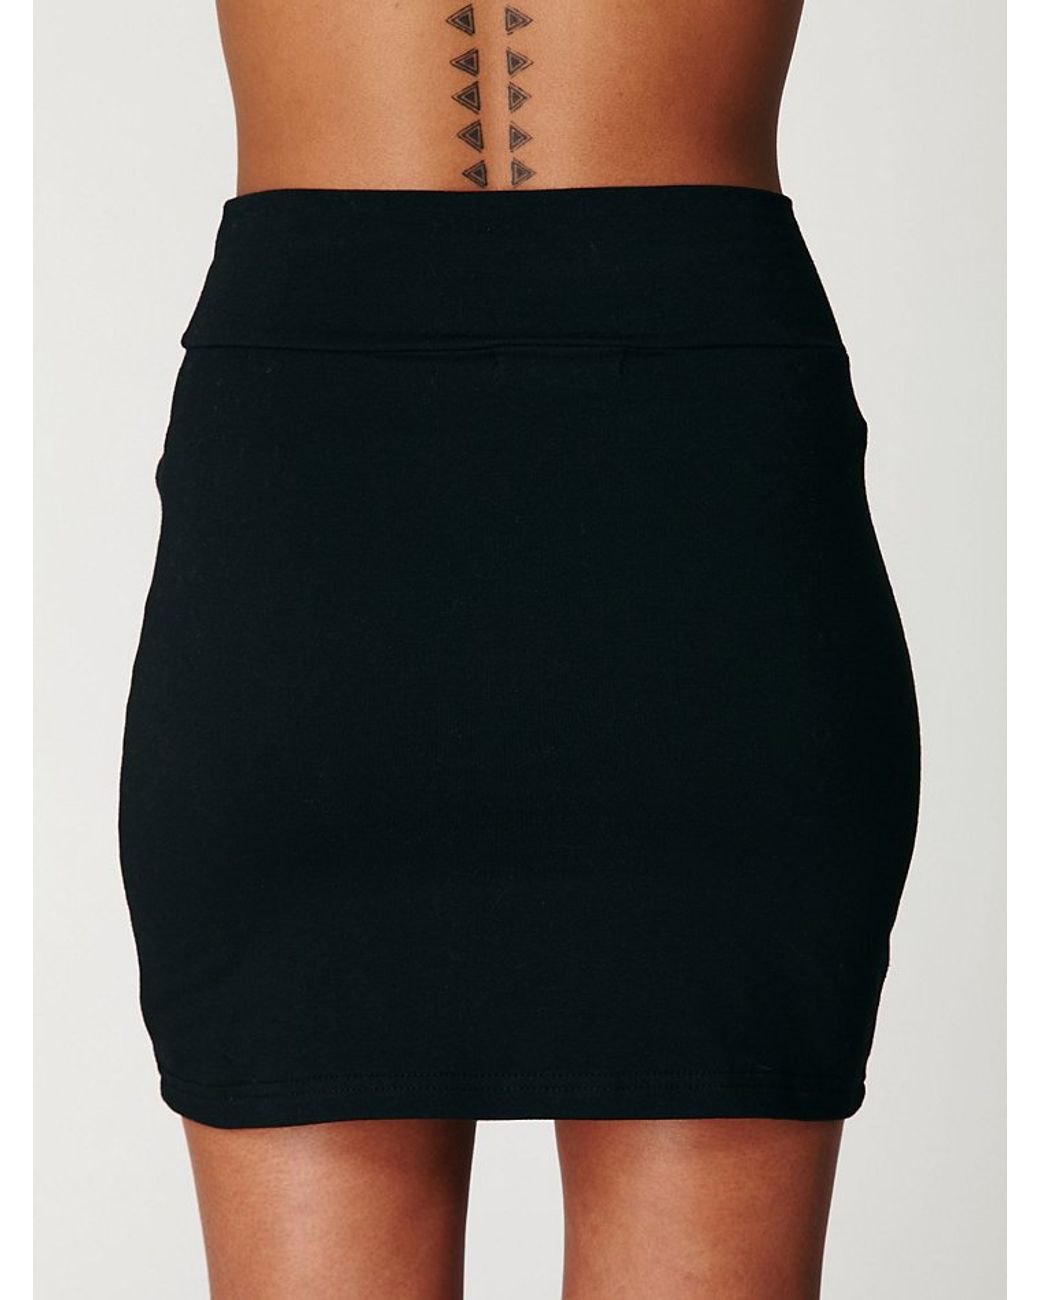 Free People Stretch Bodycon Mini Skirt in Black | Lyst